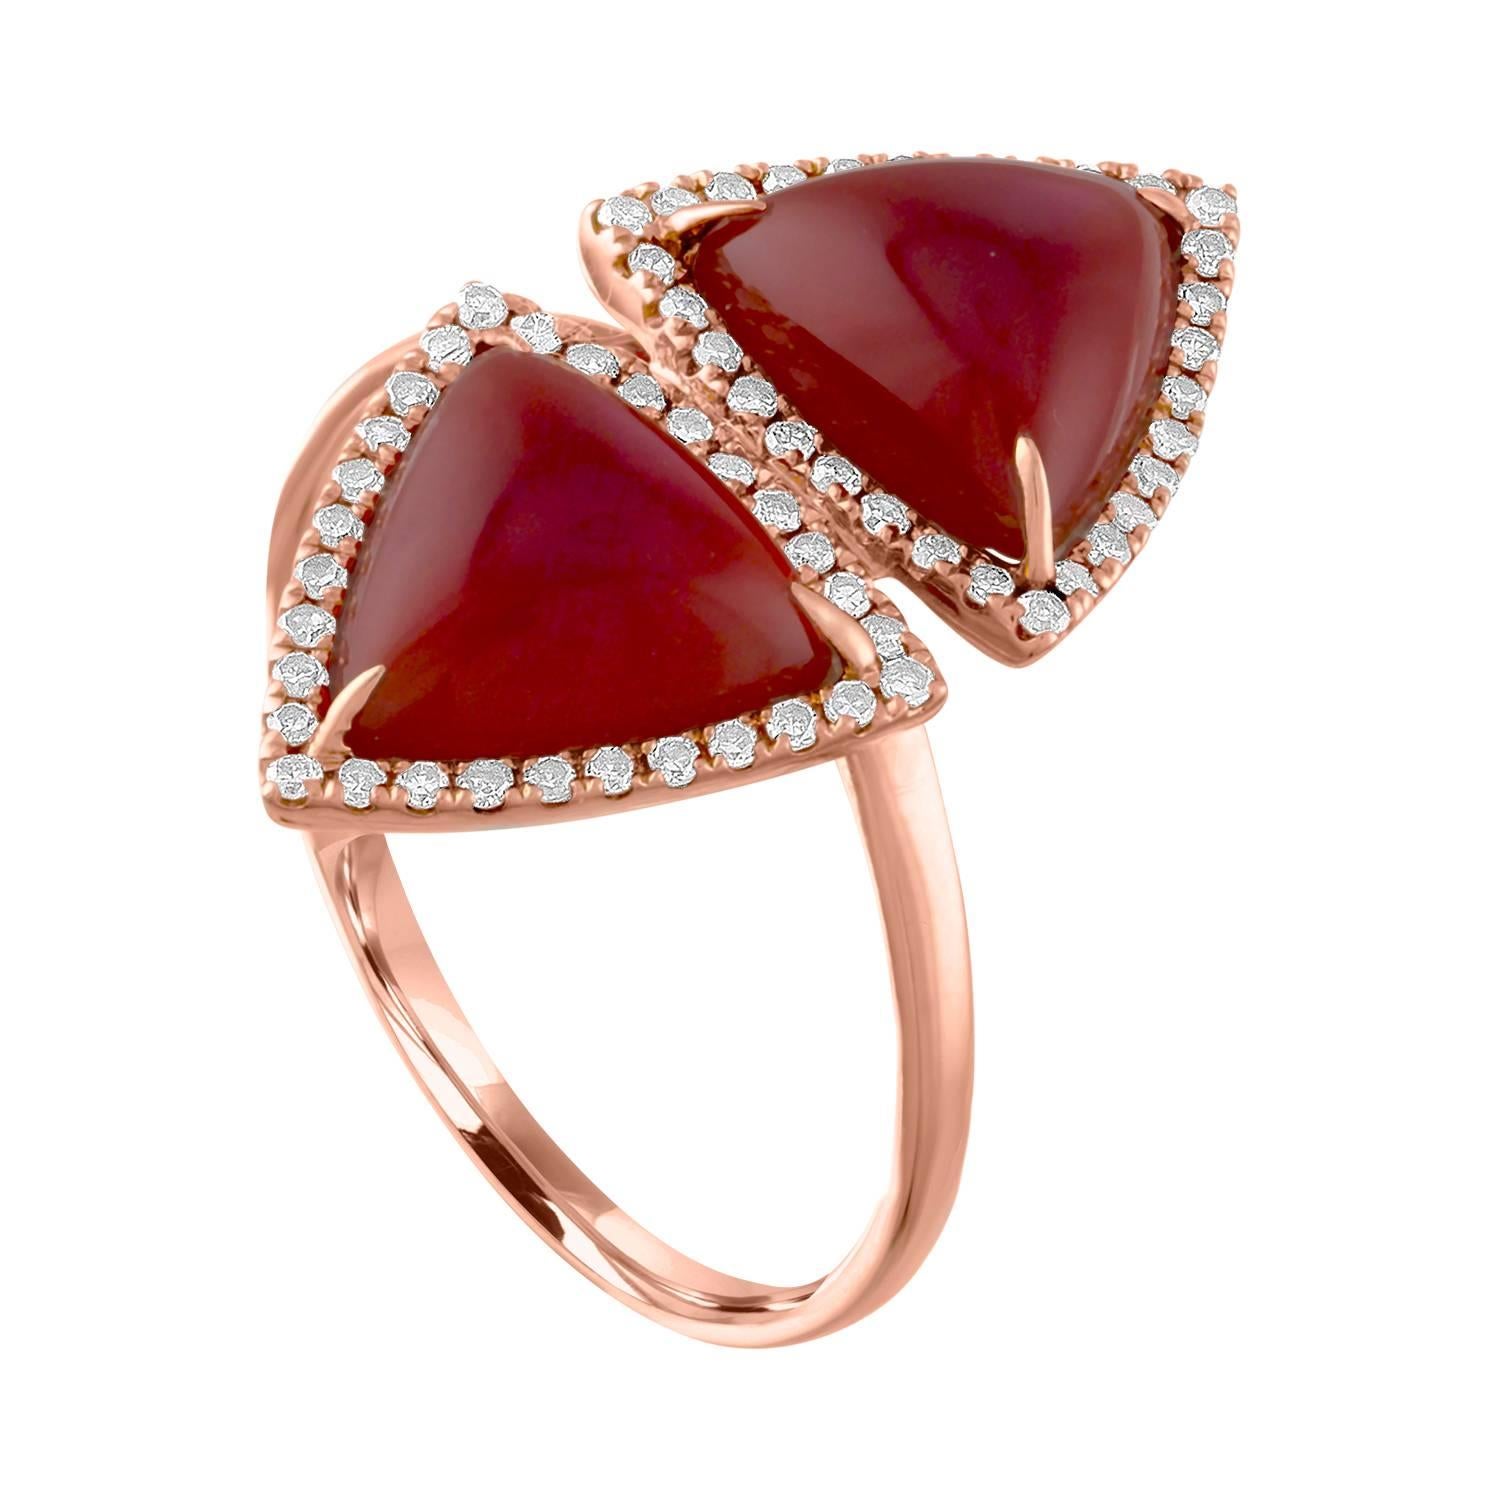 Stunning Trillion Shaped Ring.
The ring is 14K Rose Gold.
There are 0.62 Carats in Diamonds H/I SI.
There is 4.00 Carats in Trillion Shaped Red Agate.
The ring measures 1